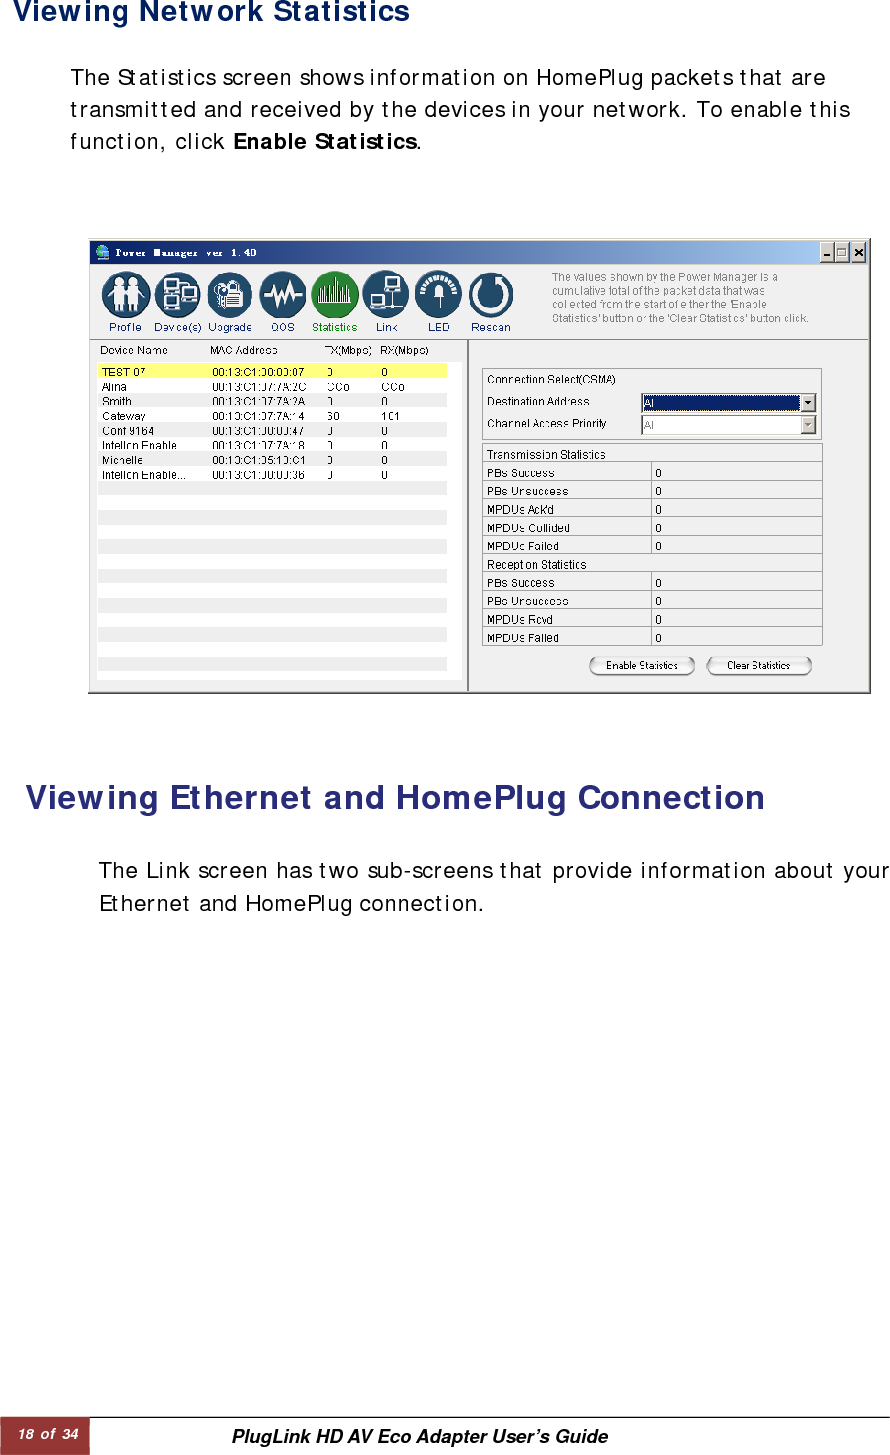 18 of 34  PlugLink HD AV Eco Adapter User’s Guide Viewing Network Statistics          The Statistics screen shows information on HomePlug packets that are transmitted and received by the devices in your network. To enable this function, click Enable Statistics.  Viewing Ethernet and HomePlug Connection   The Link screen has two sub-screens that provide information about yourEthernet and HomePlug connection.  